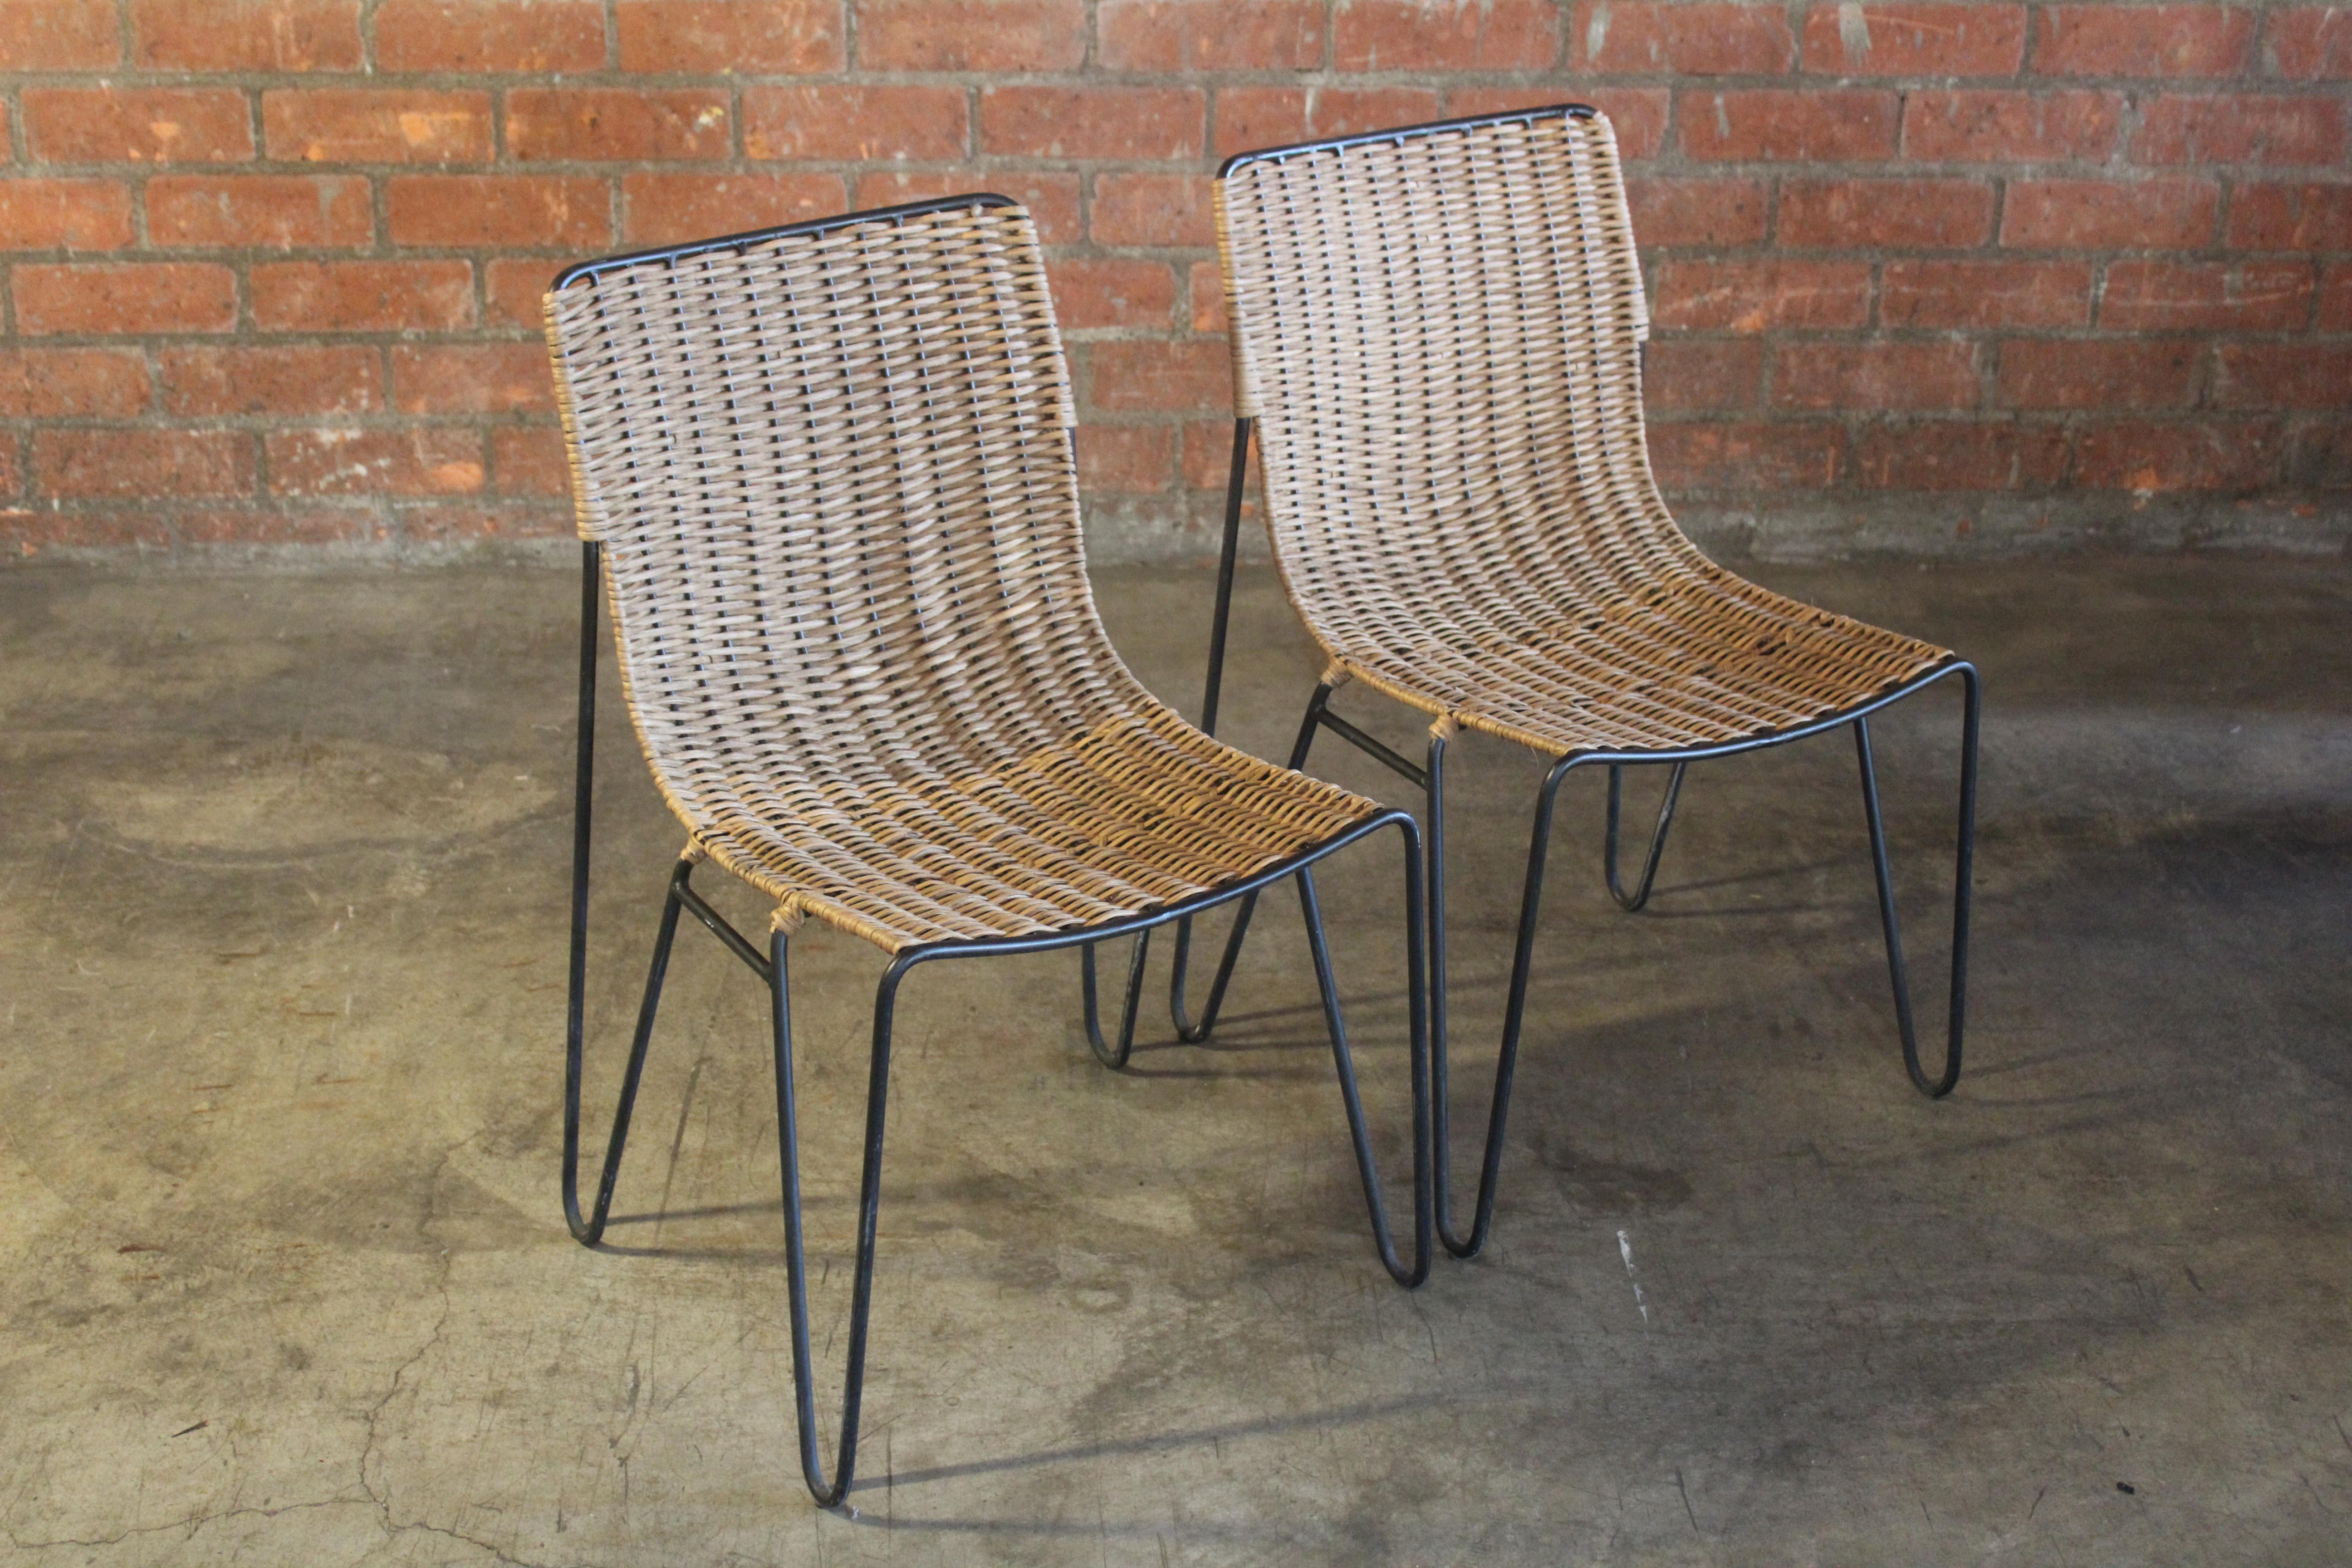 Pair of iron side chairs in wicker. Newly hand woven with new wicker. Sold as a pair.